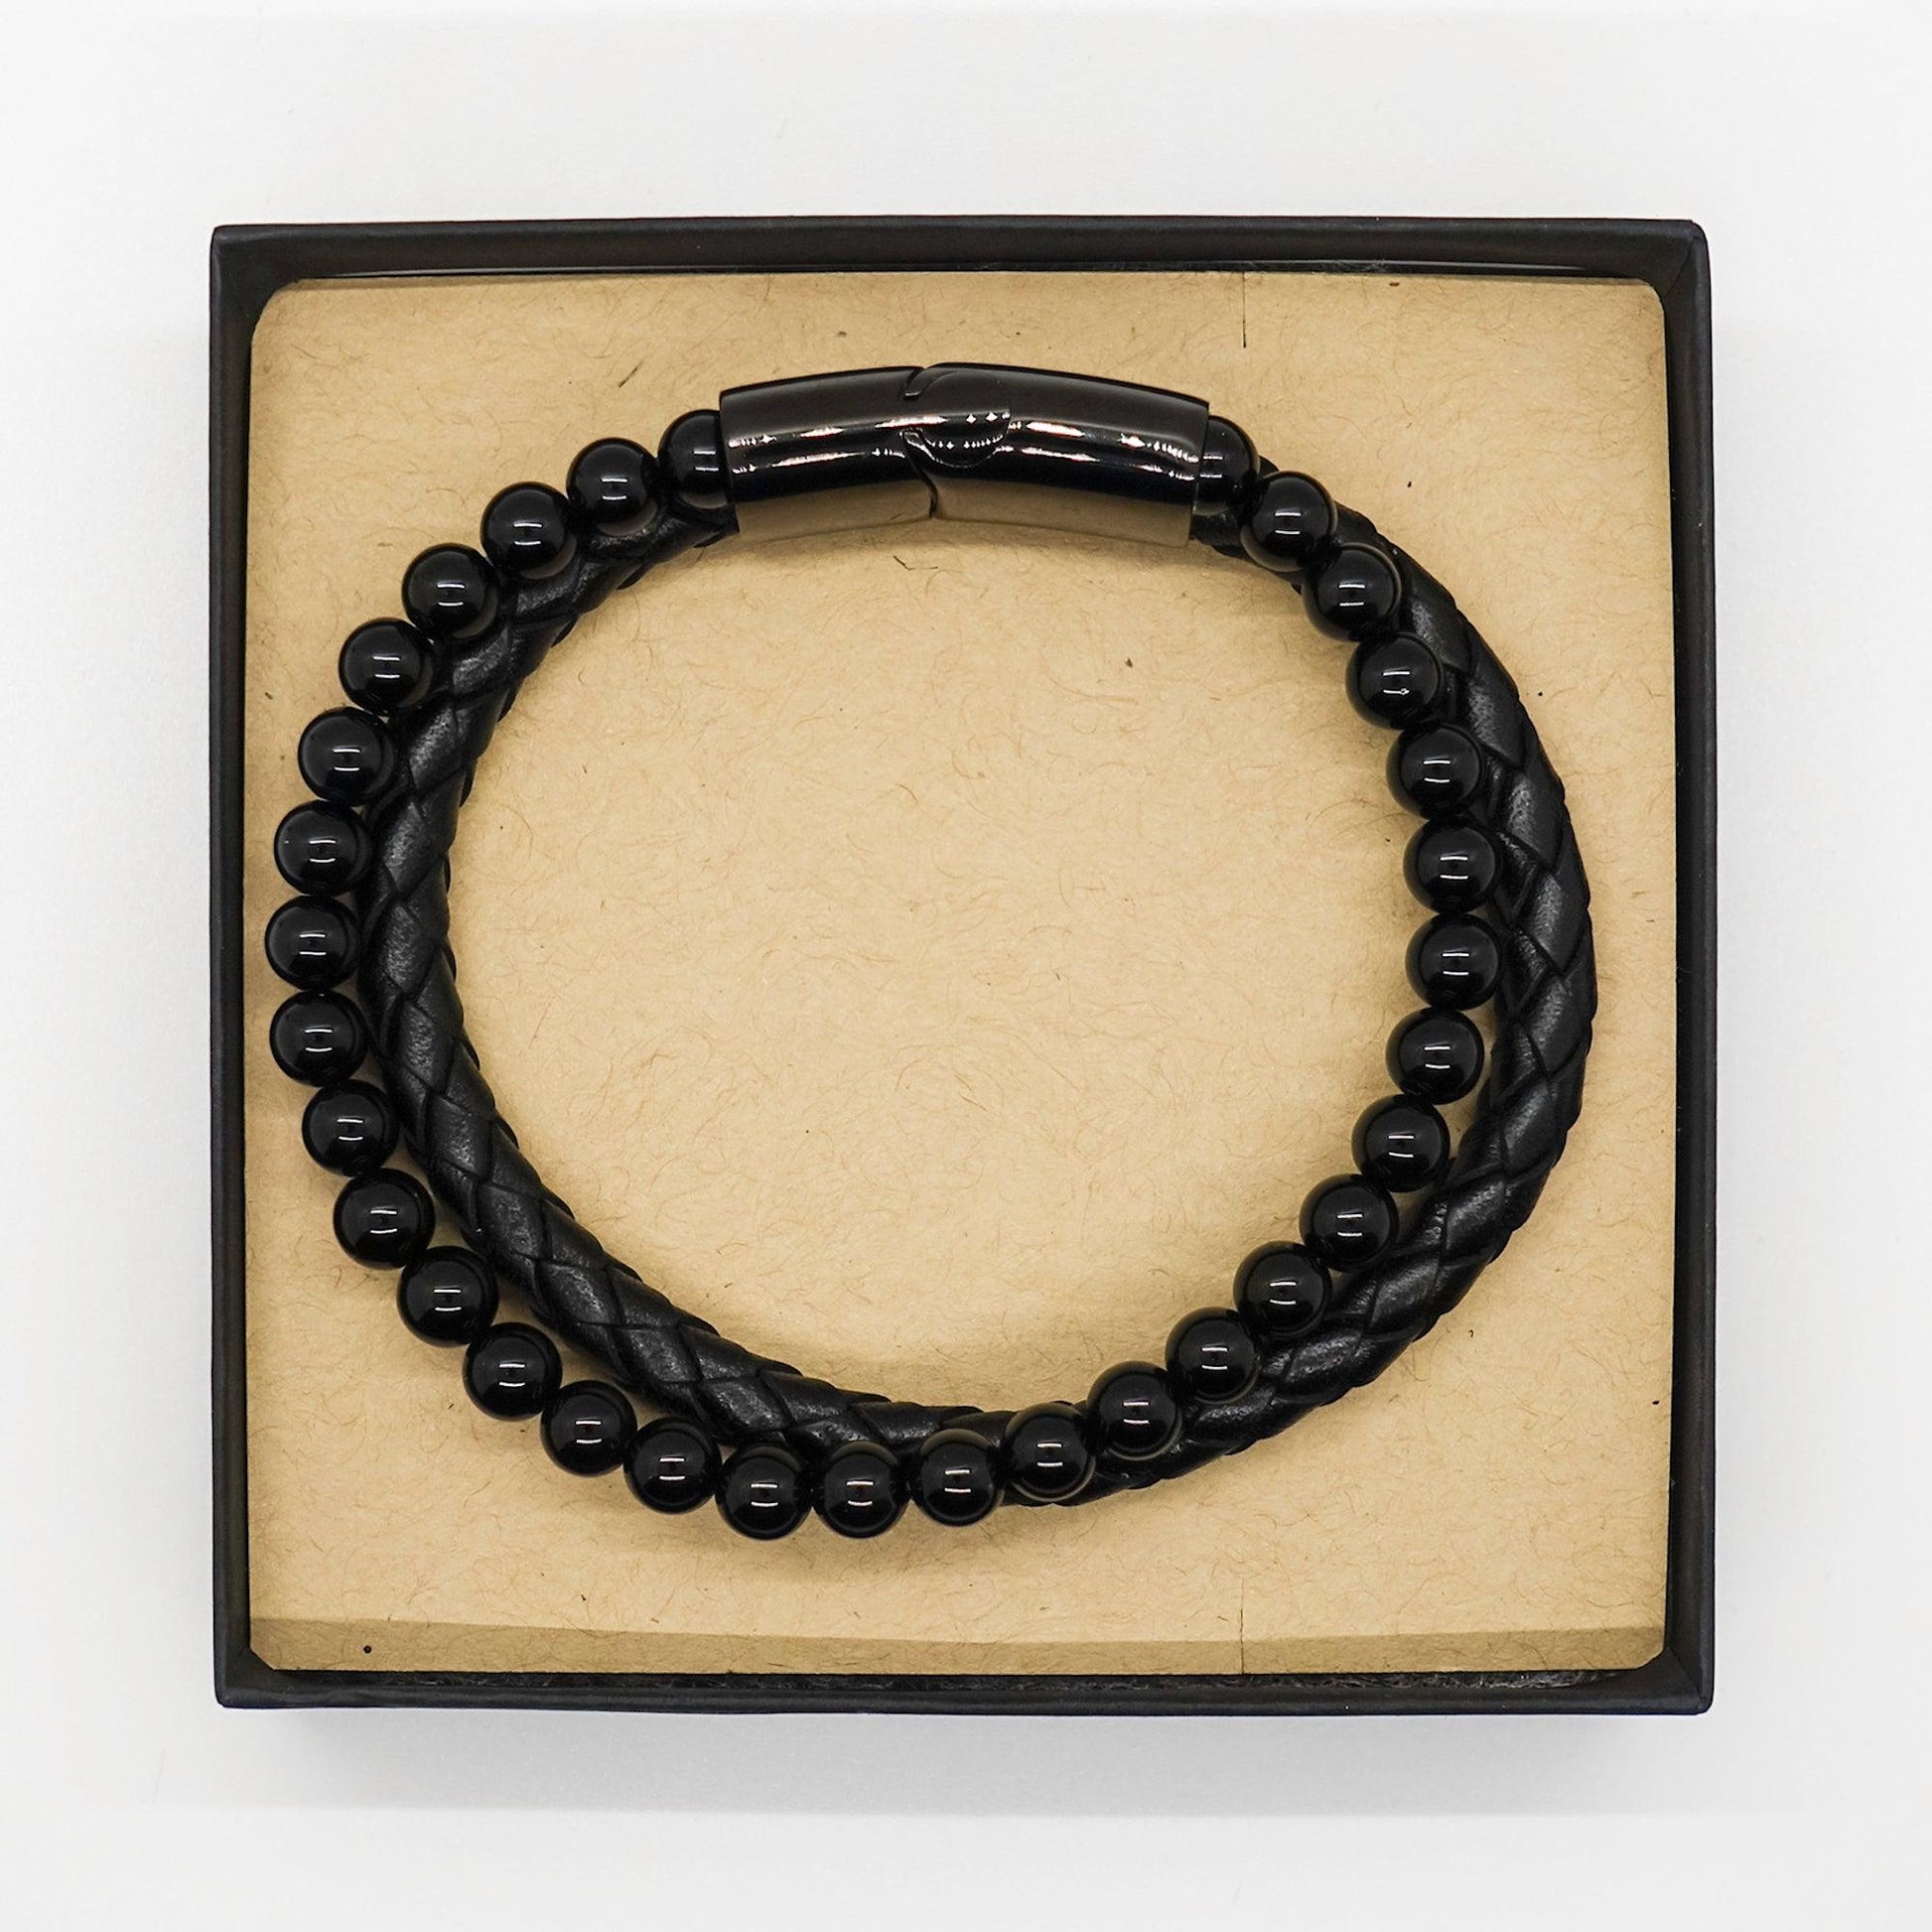 Attendant Black Braided Stone Leather Bracelet - Thanks for being who you are - Birthday Christmas Jewelry Gifts Coworkers Colleague Boss - Mallard Moon Gift Shop